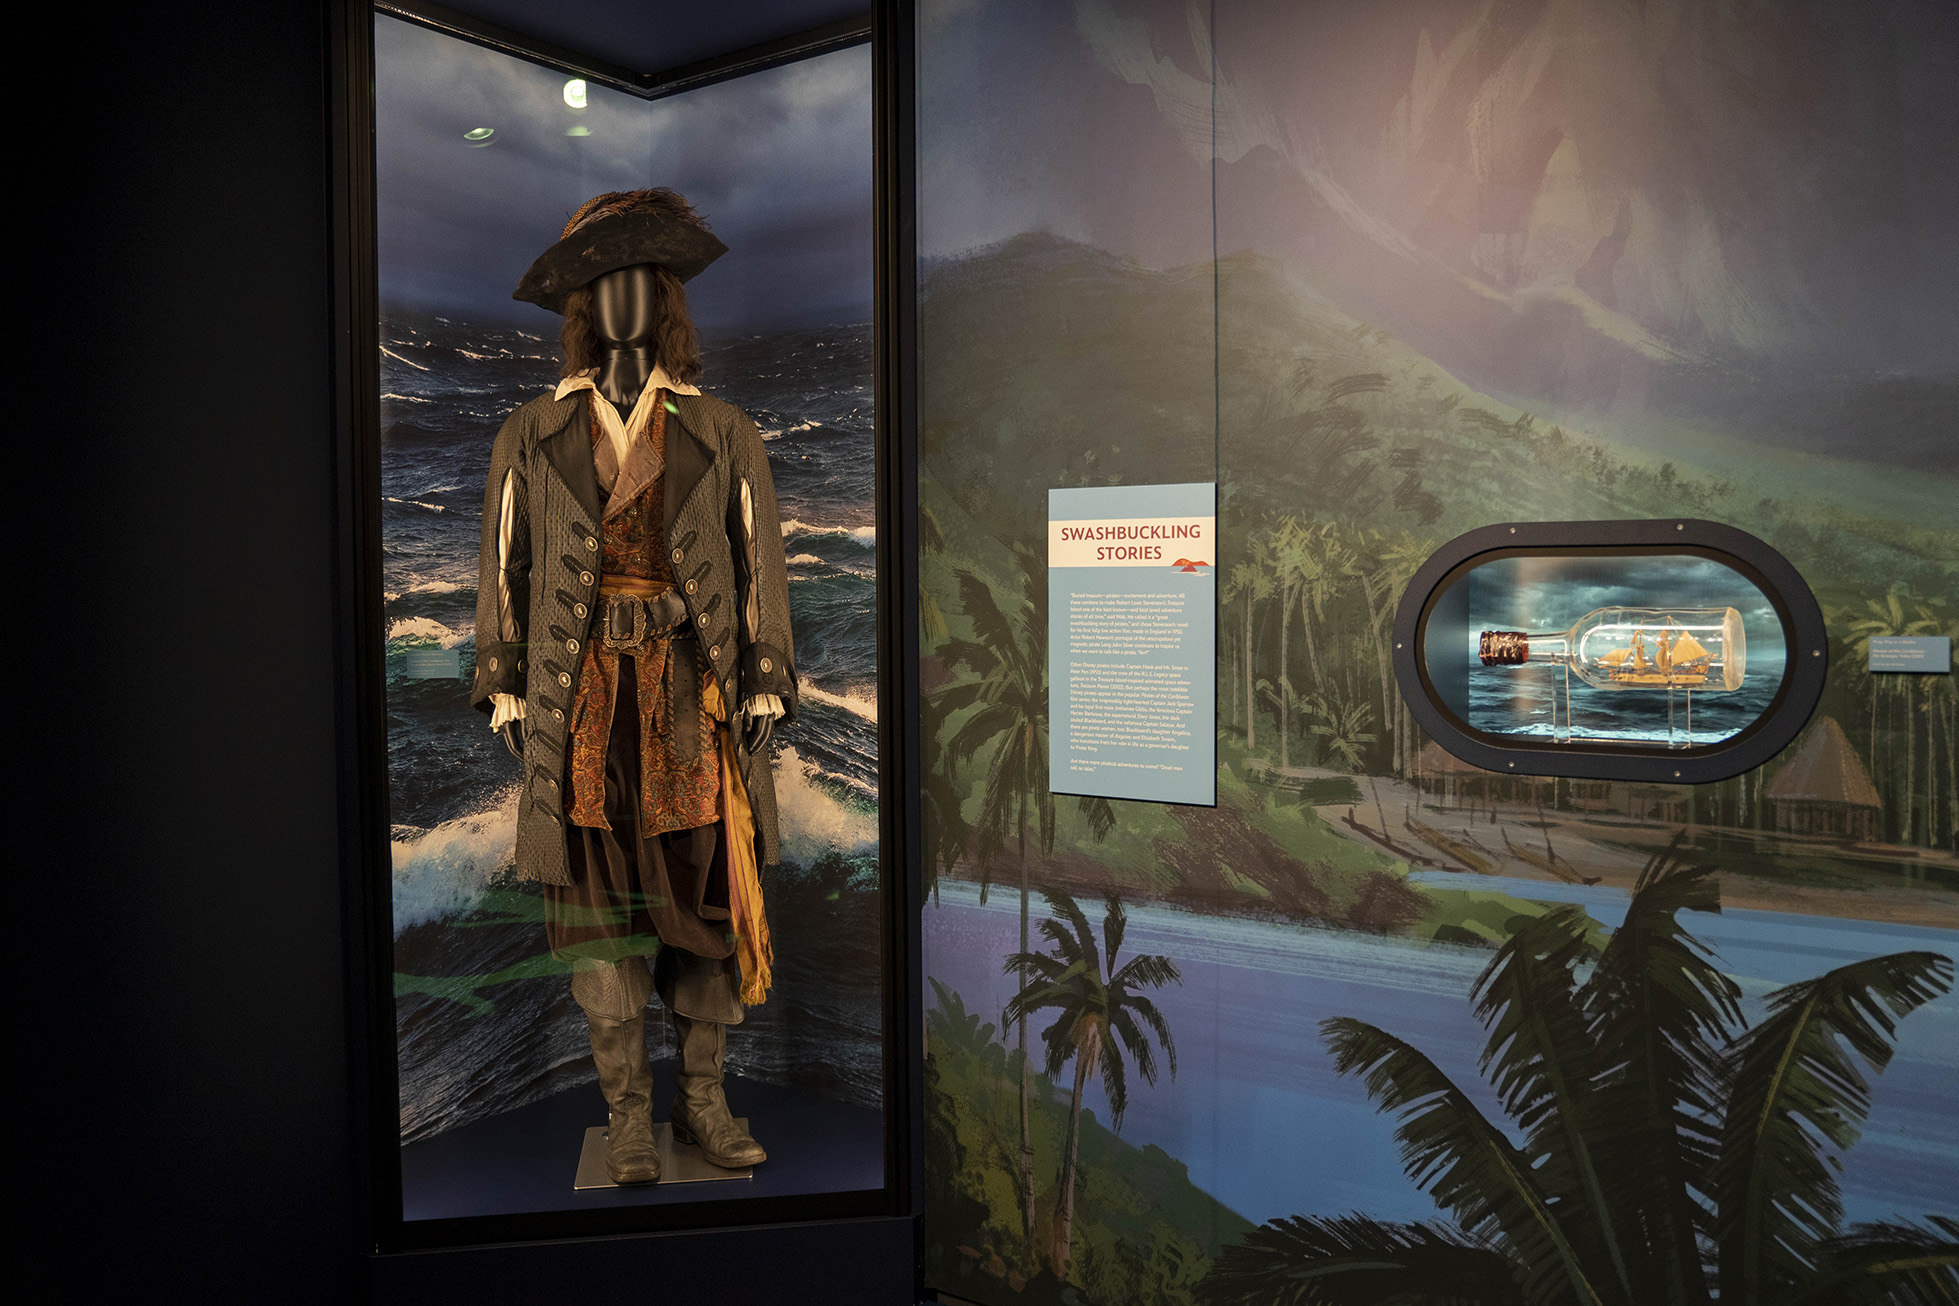 Captain Barbossa costume worn by Geoffrey Rush in Pirates of the Caribbean: The Curse of the Black Pearl (2003) and prop ship in a bottle from Pirates of the Caribbean: On Stranger Tides (2011) on display at Disney100: The Exhibition, now open at The Franklin Institute in Philadelphia. 